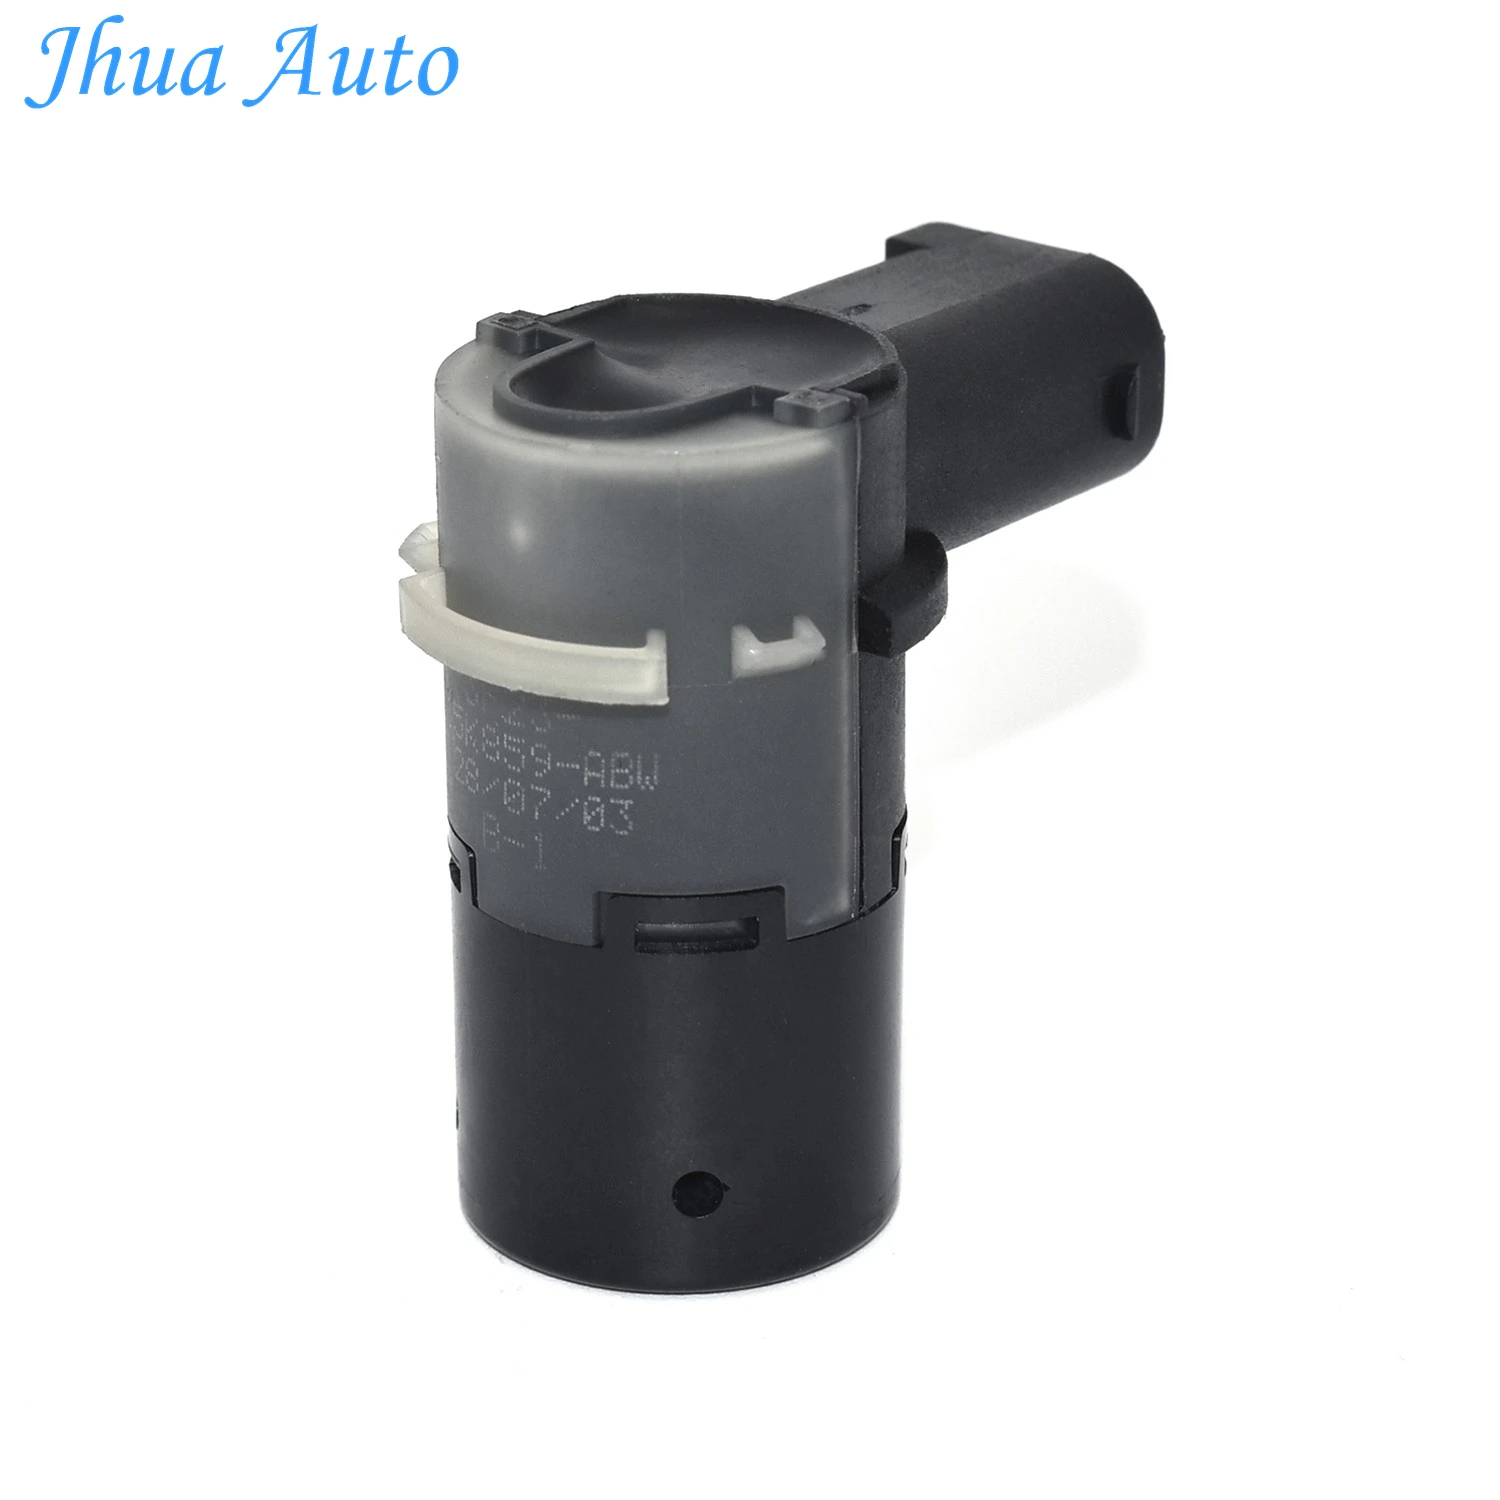 High Quality Accessories Reversing Radar 2C54-15K859-ABW For Ford Paking  Sensor, 12Months Warranty _ - AliExpress Mobile